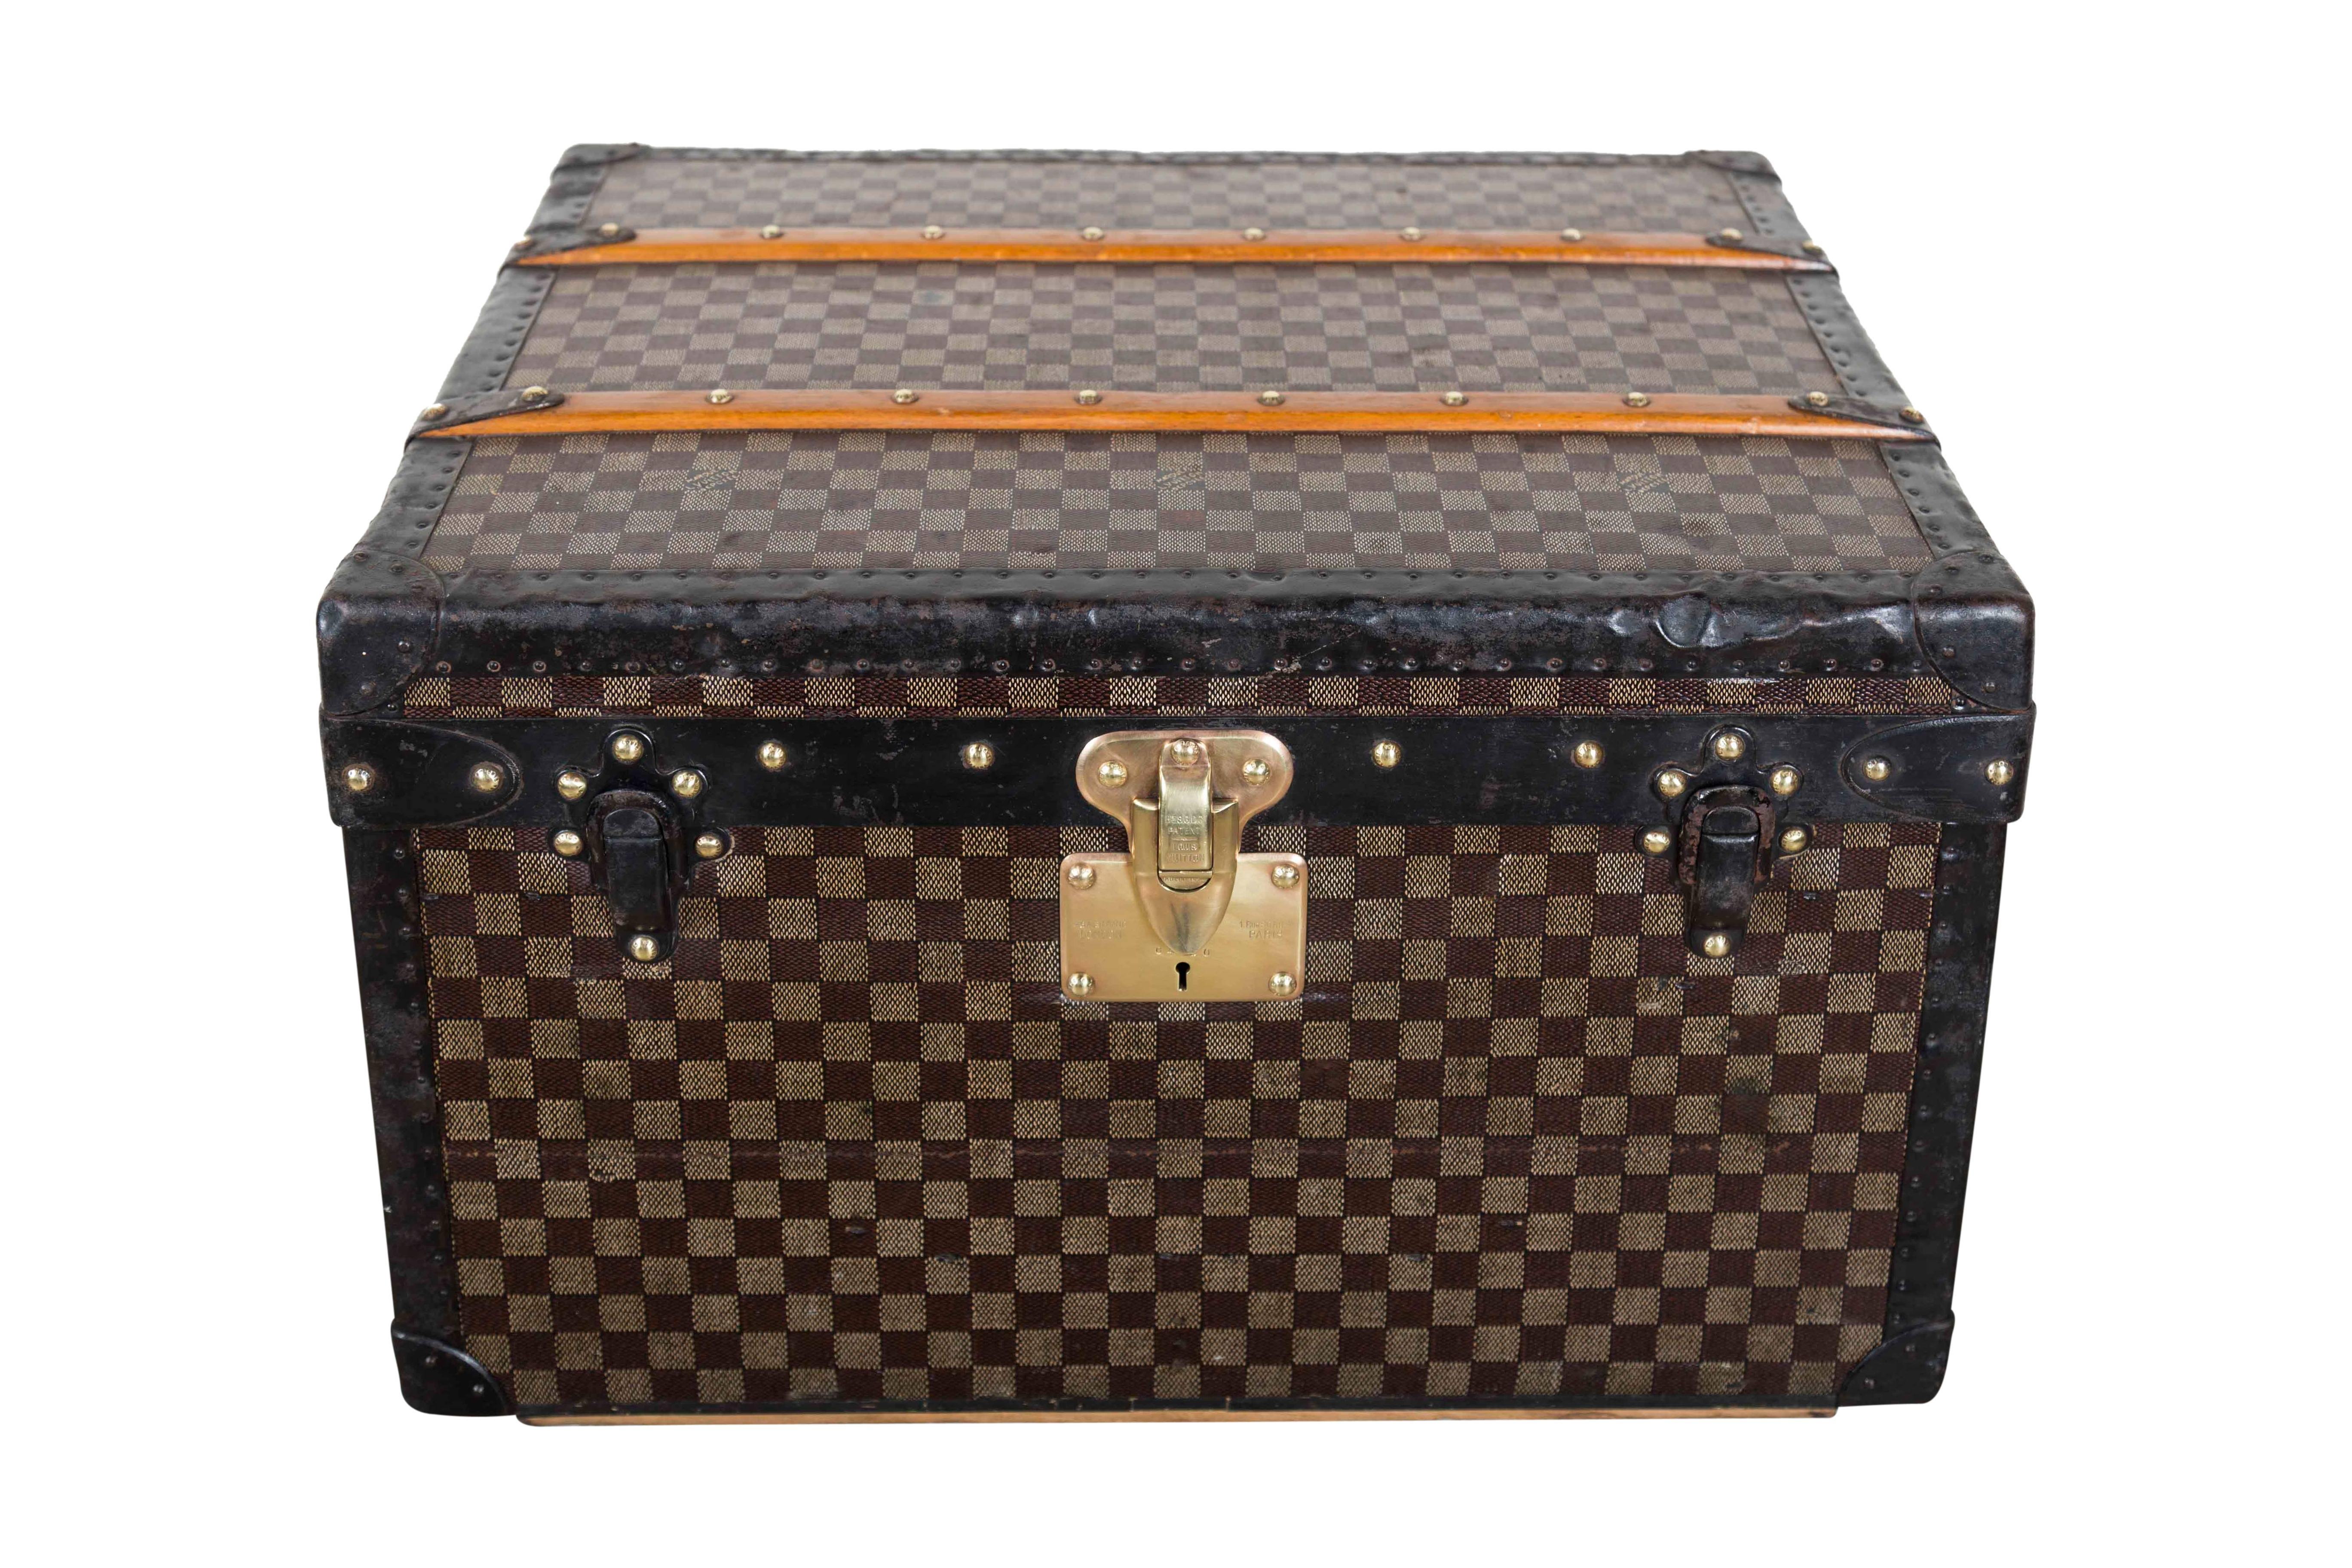 This is a Louis Vuitton custom monogramed boot case with original key and dust bag. The pattern is officially knowns as the Louis Vuitton Damier Ebene Cavnvas, and it was actually created in 1888, before the very recognizable monogram pattern. The